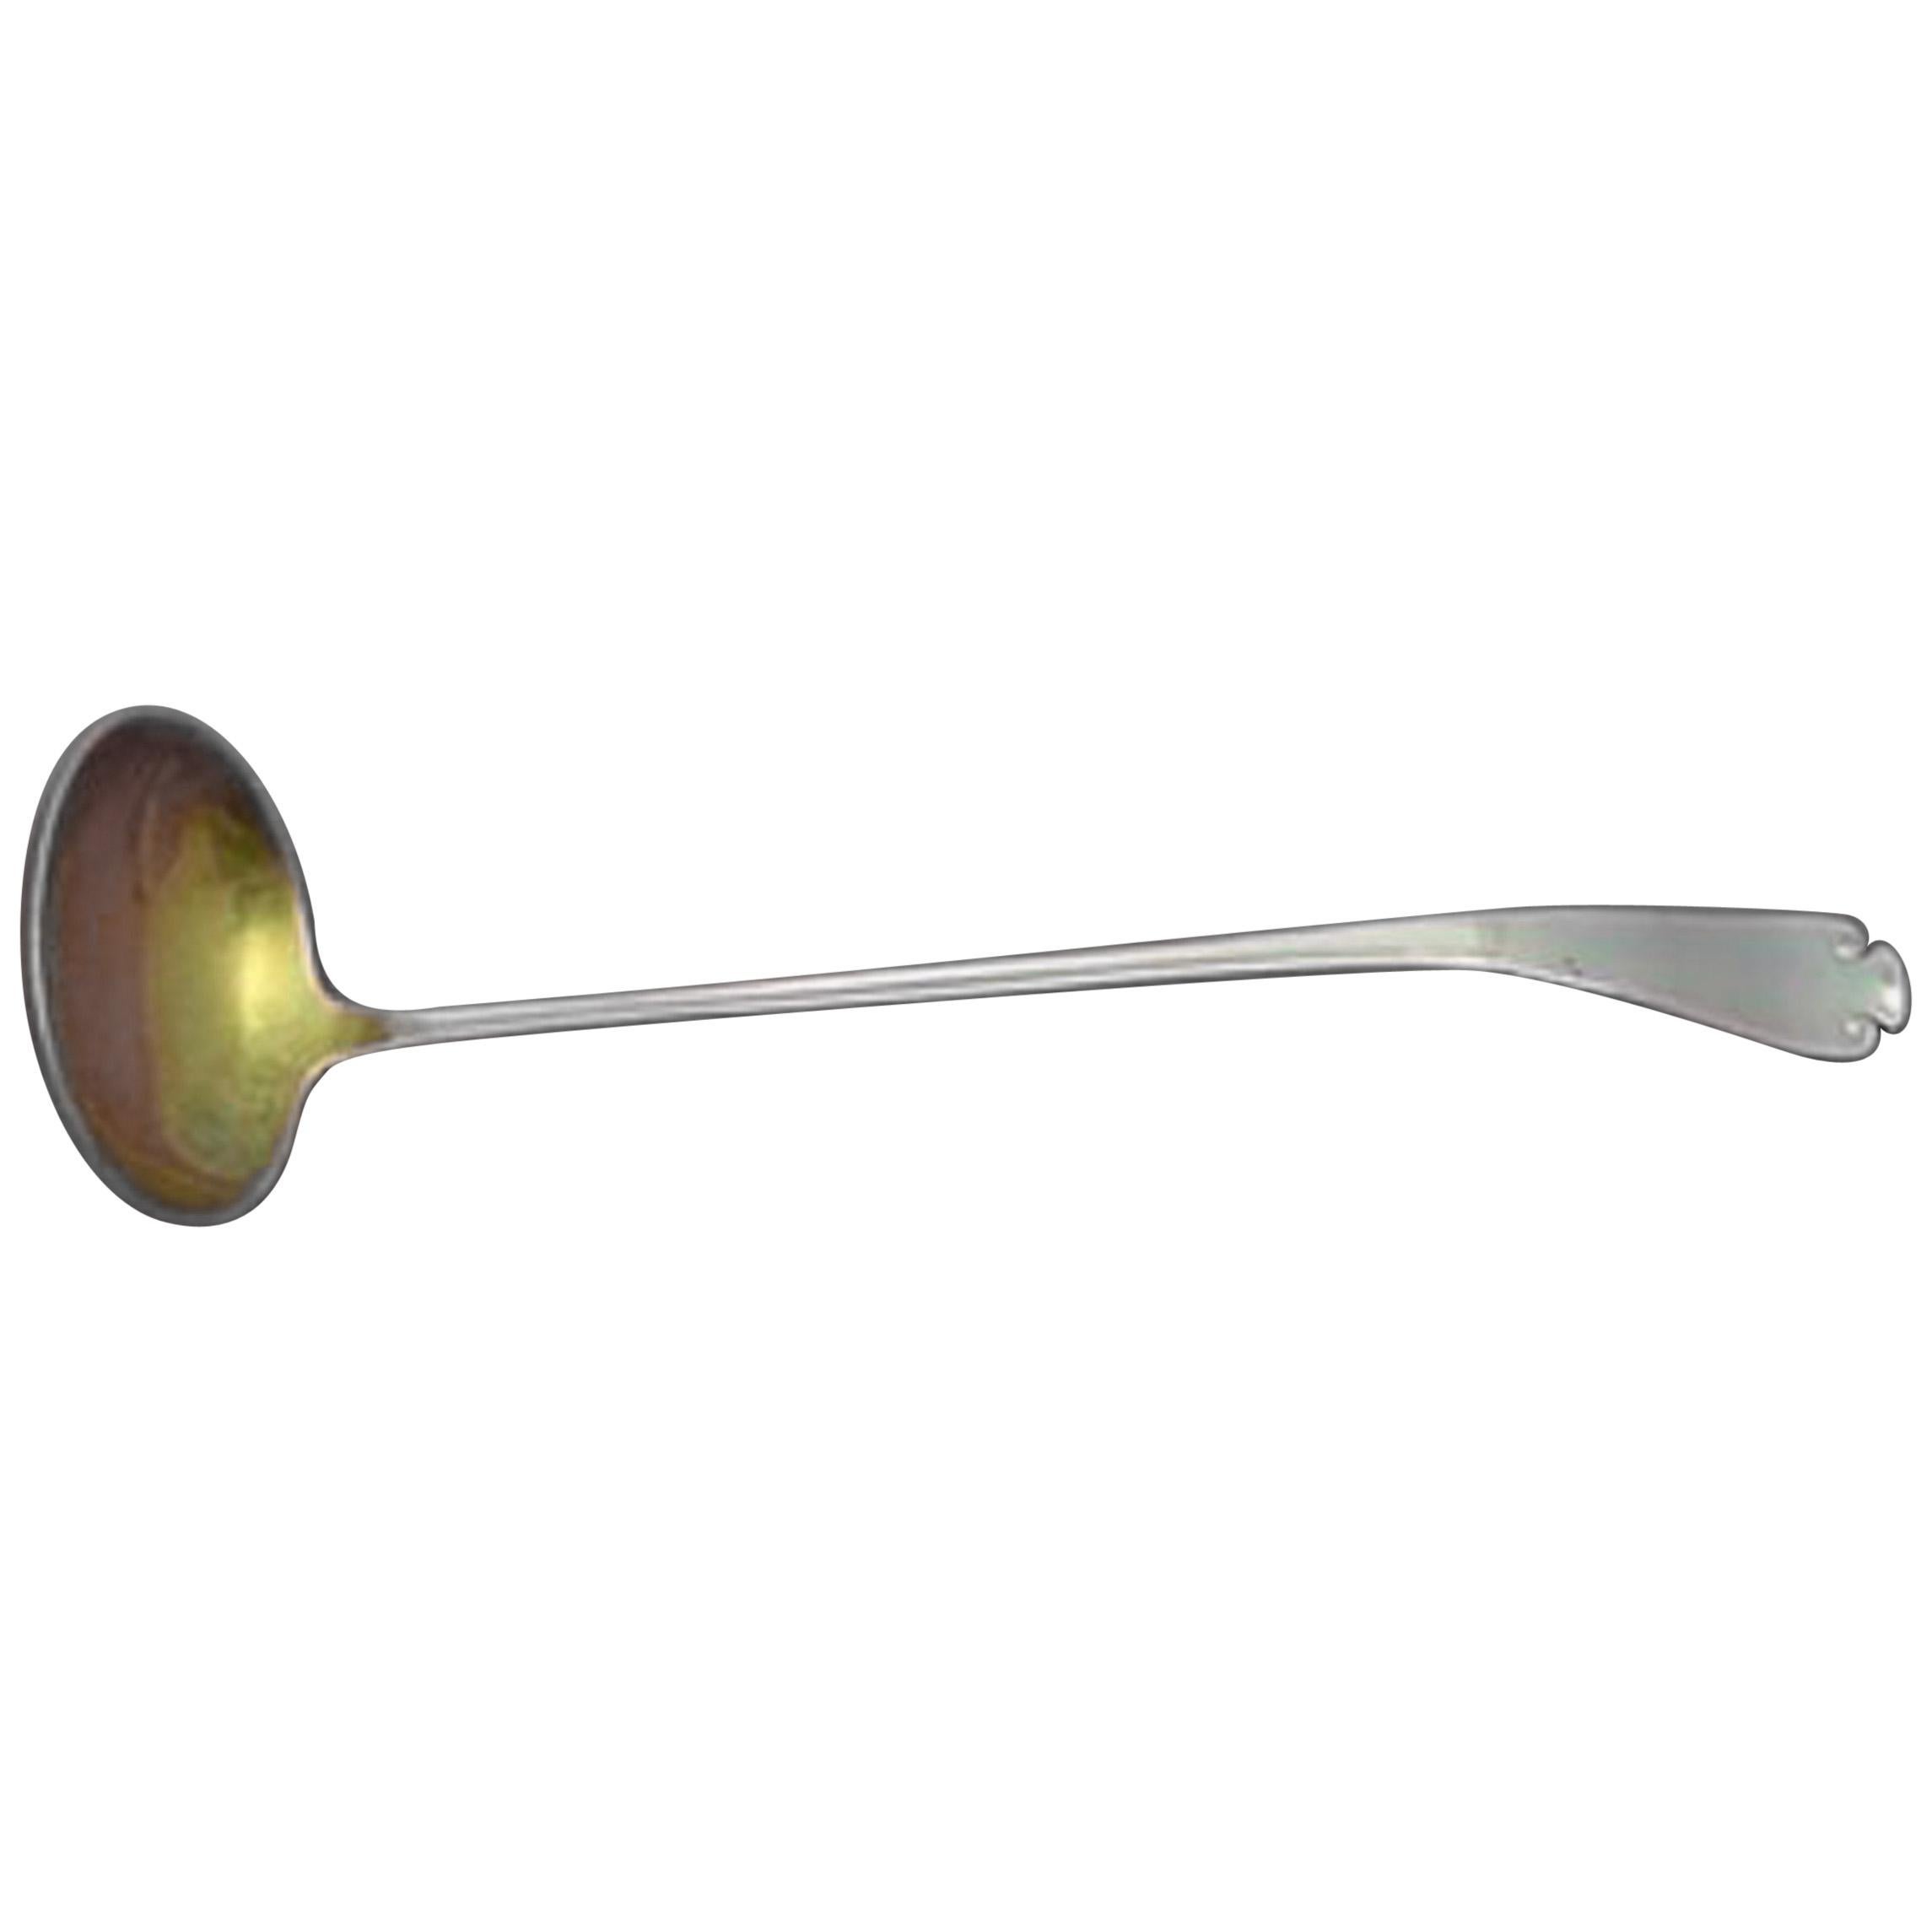 Flemish by Tiffany & Co. Sterling Silver Sauce Ladle Gold Washed